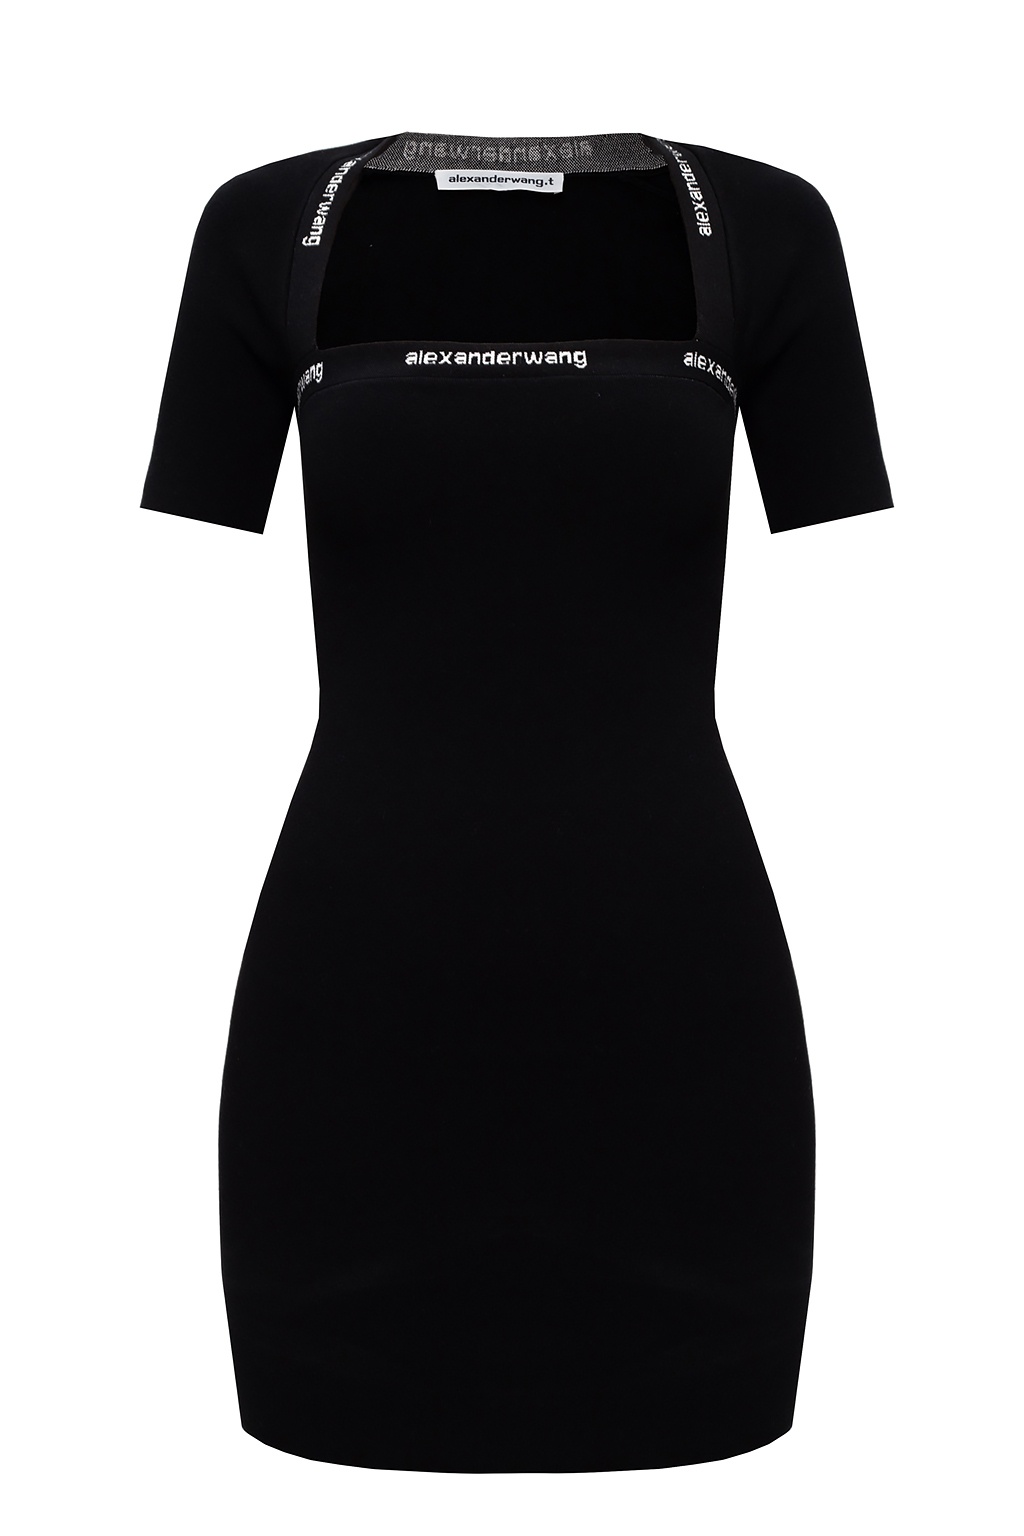 T by Alexander Wang Branded dress ...